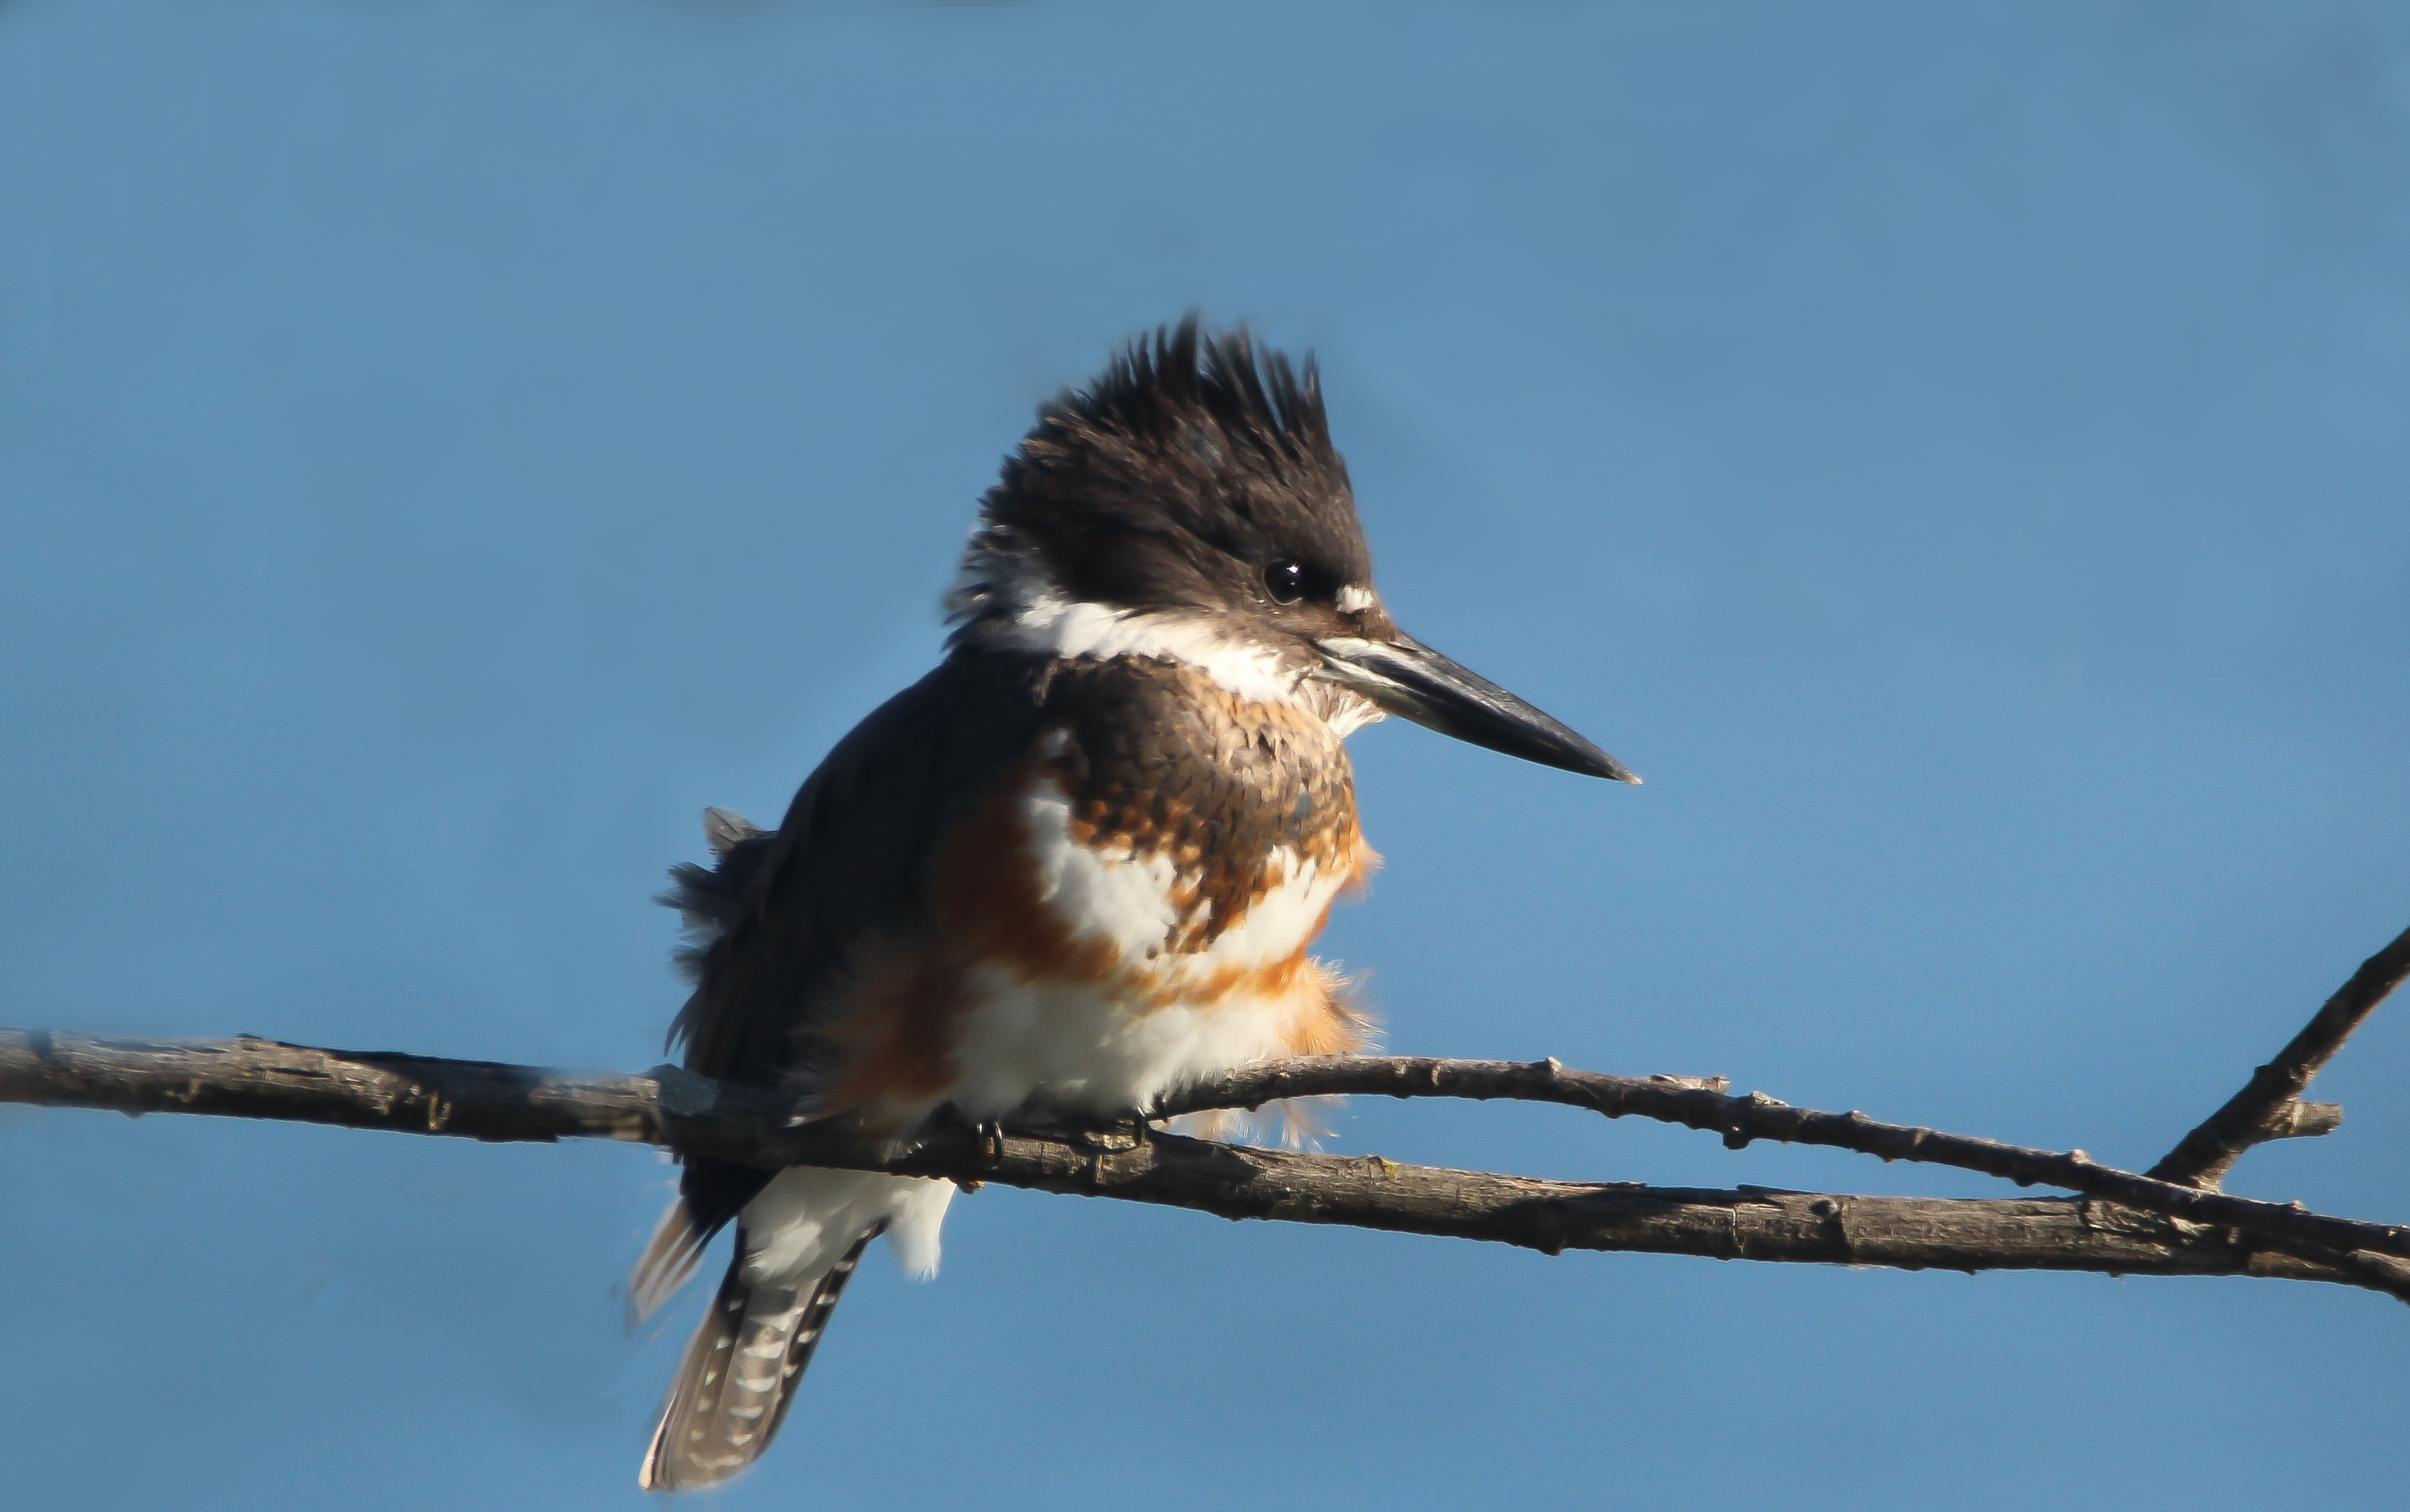 Listen for the rattle of the Belted Kingfisher at Richmond Terrace Park. Photo: <a href=\"https://www.flickr.com/photos/89780664@N05/\" target=\"_blank\">Dave Ostapiuk</a>